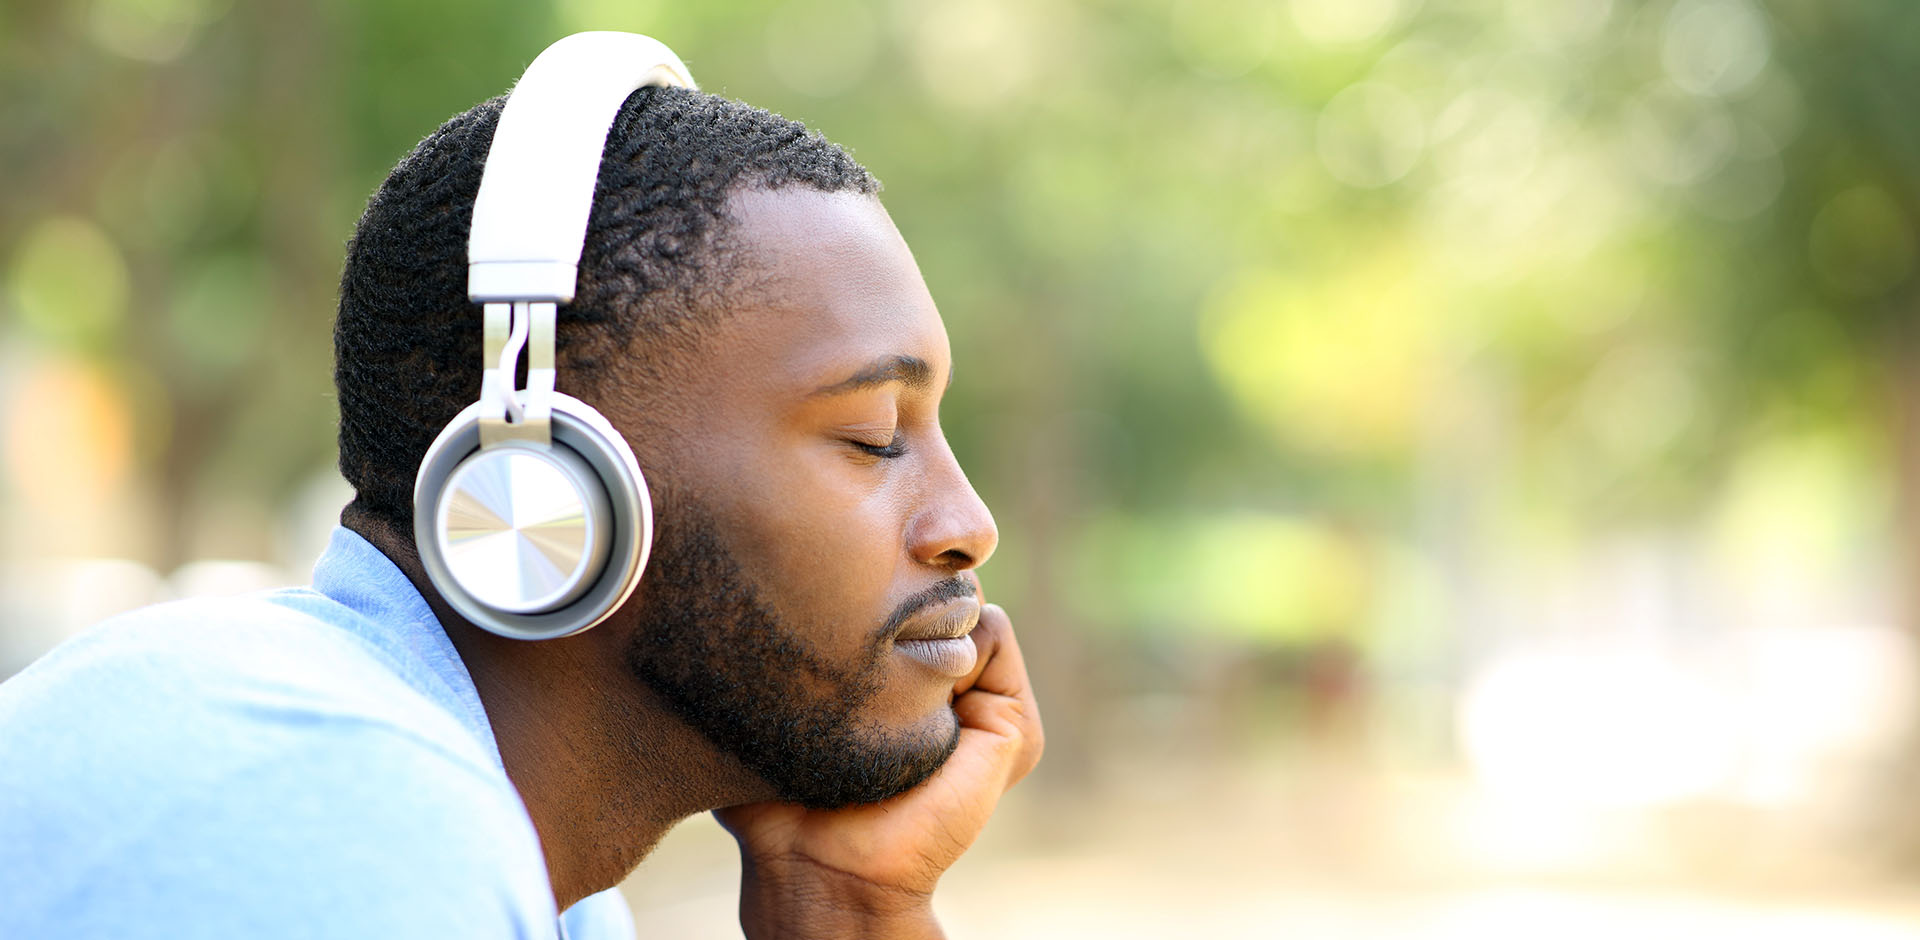 Man listening to music in a park.